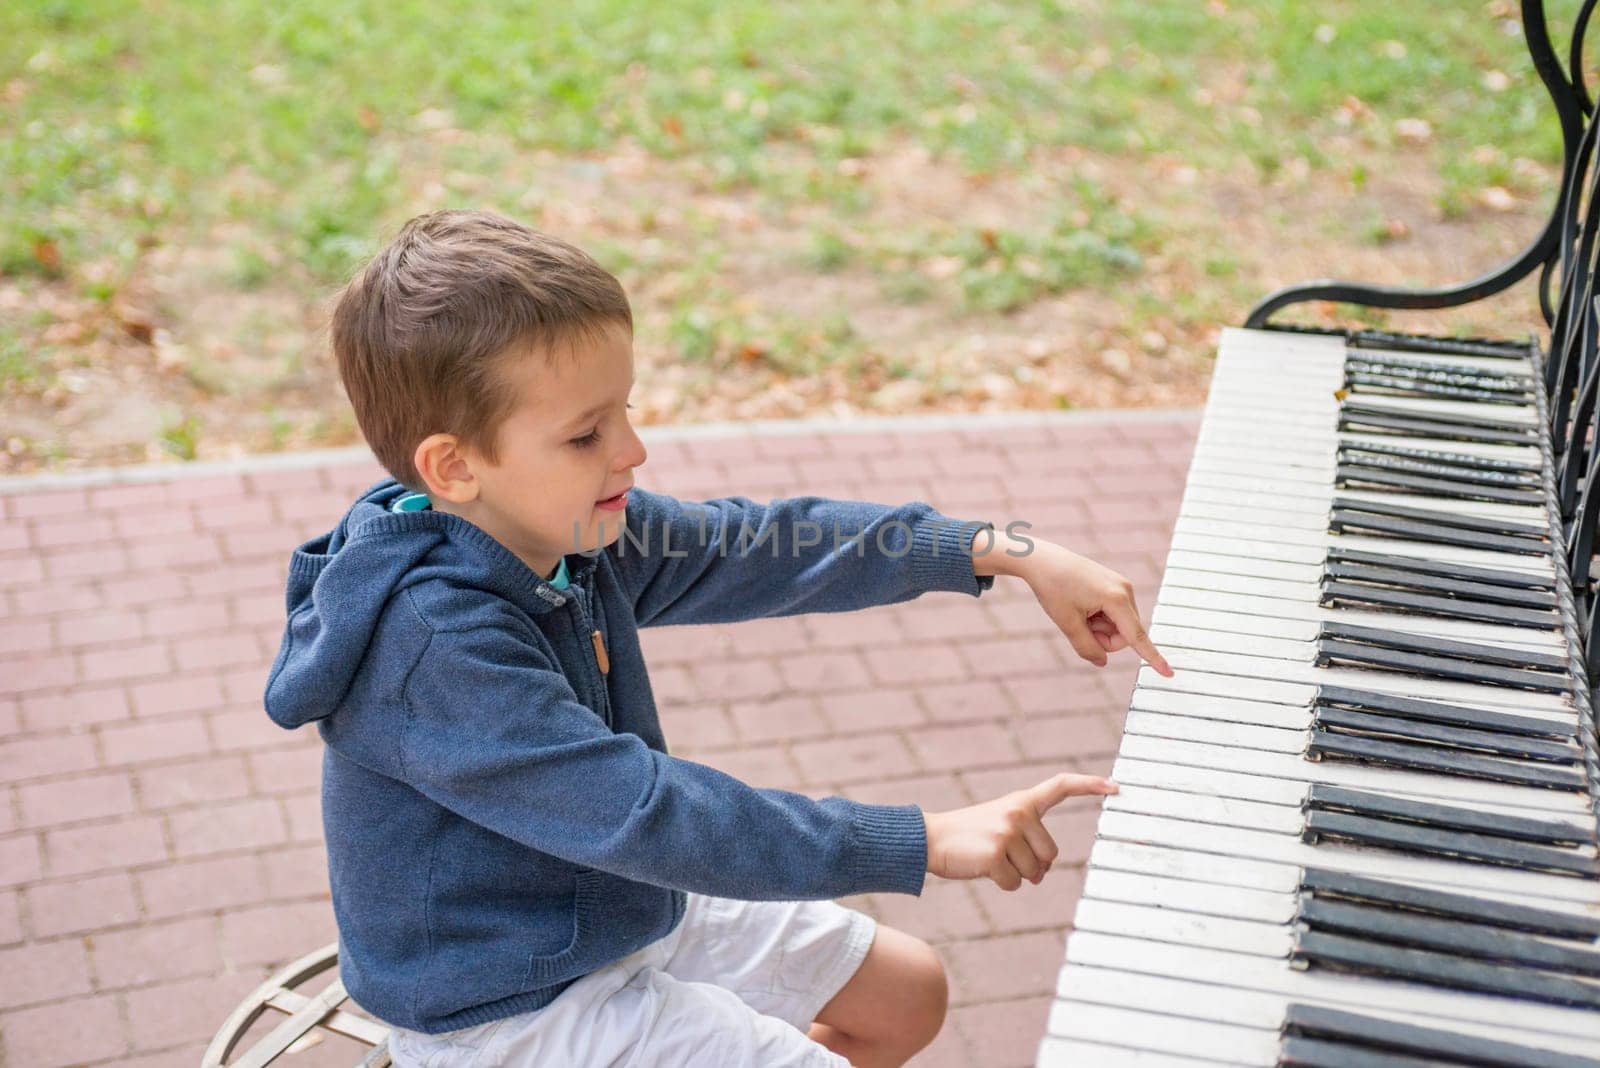 A little boy plays the street piano in the summer. Child playing piano by andreyz